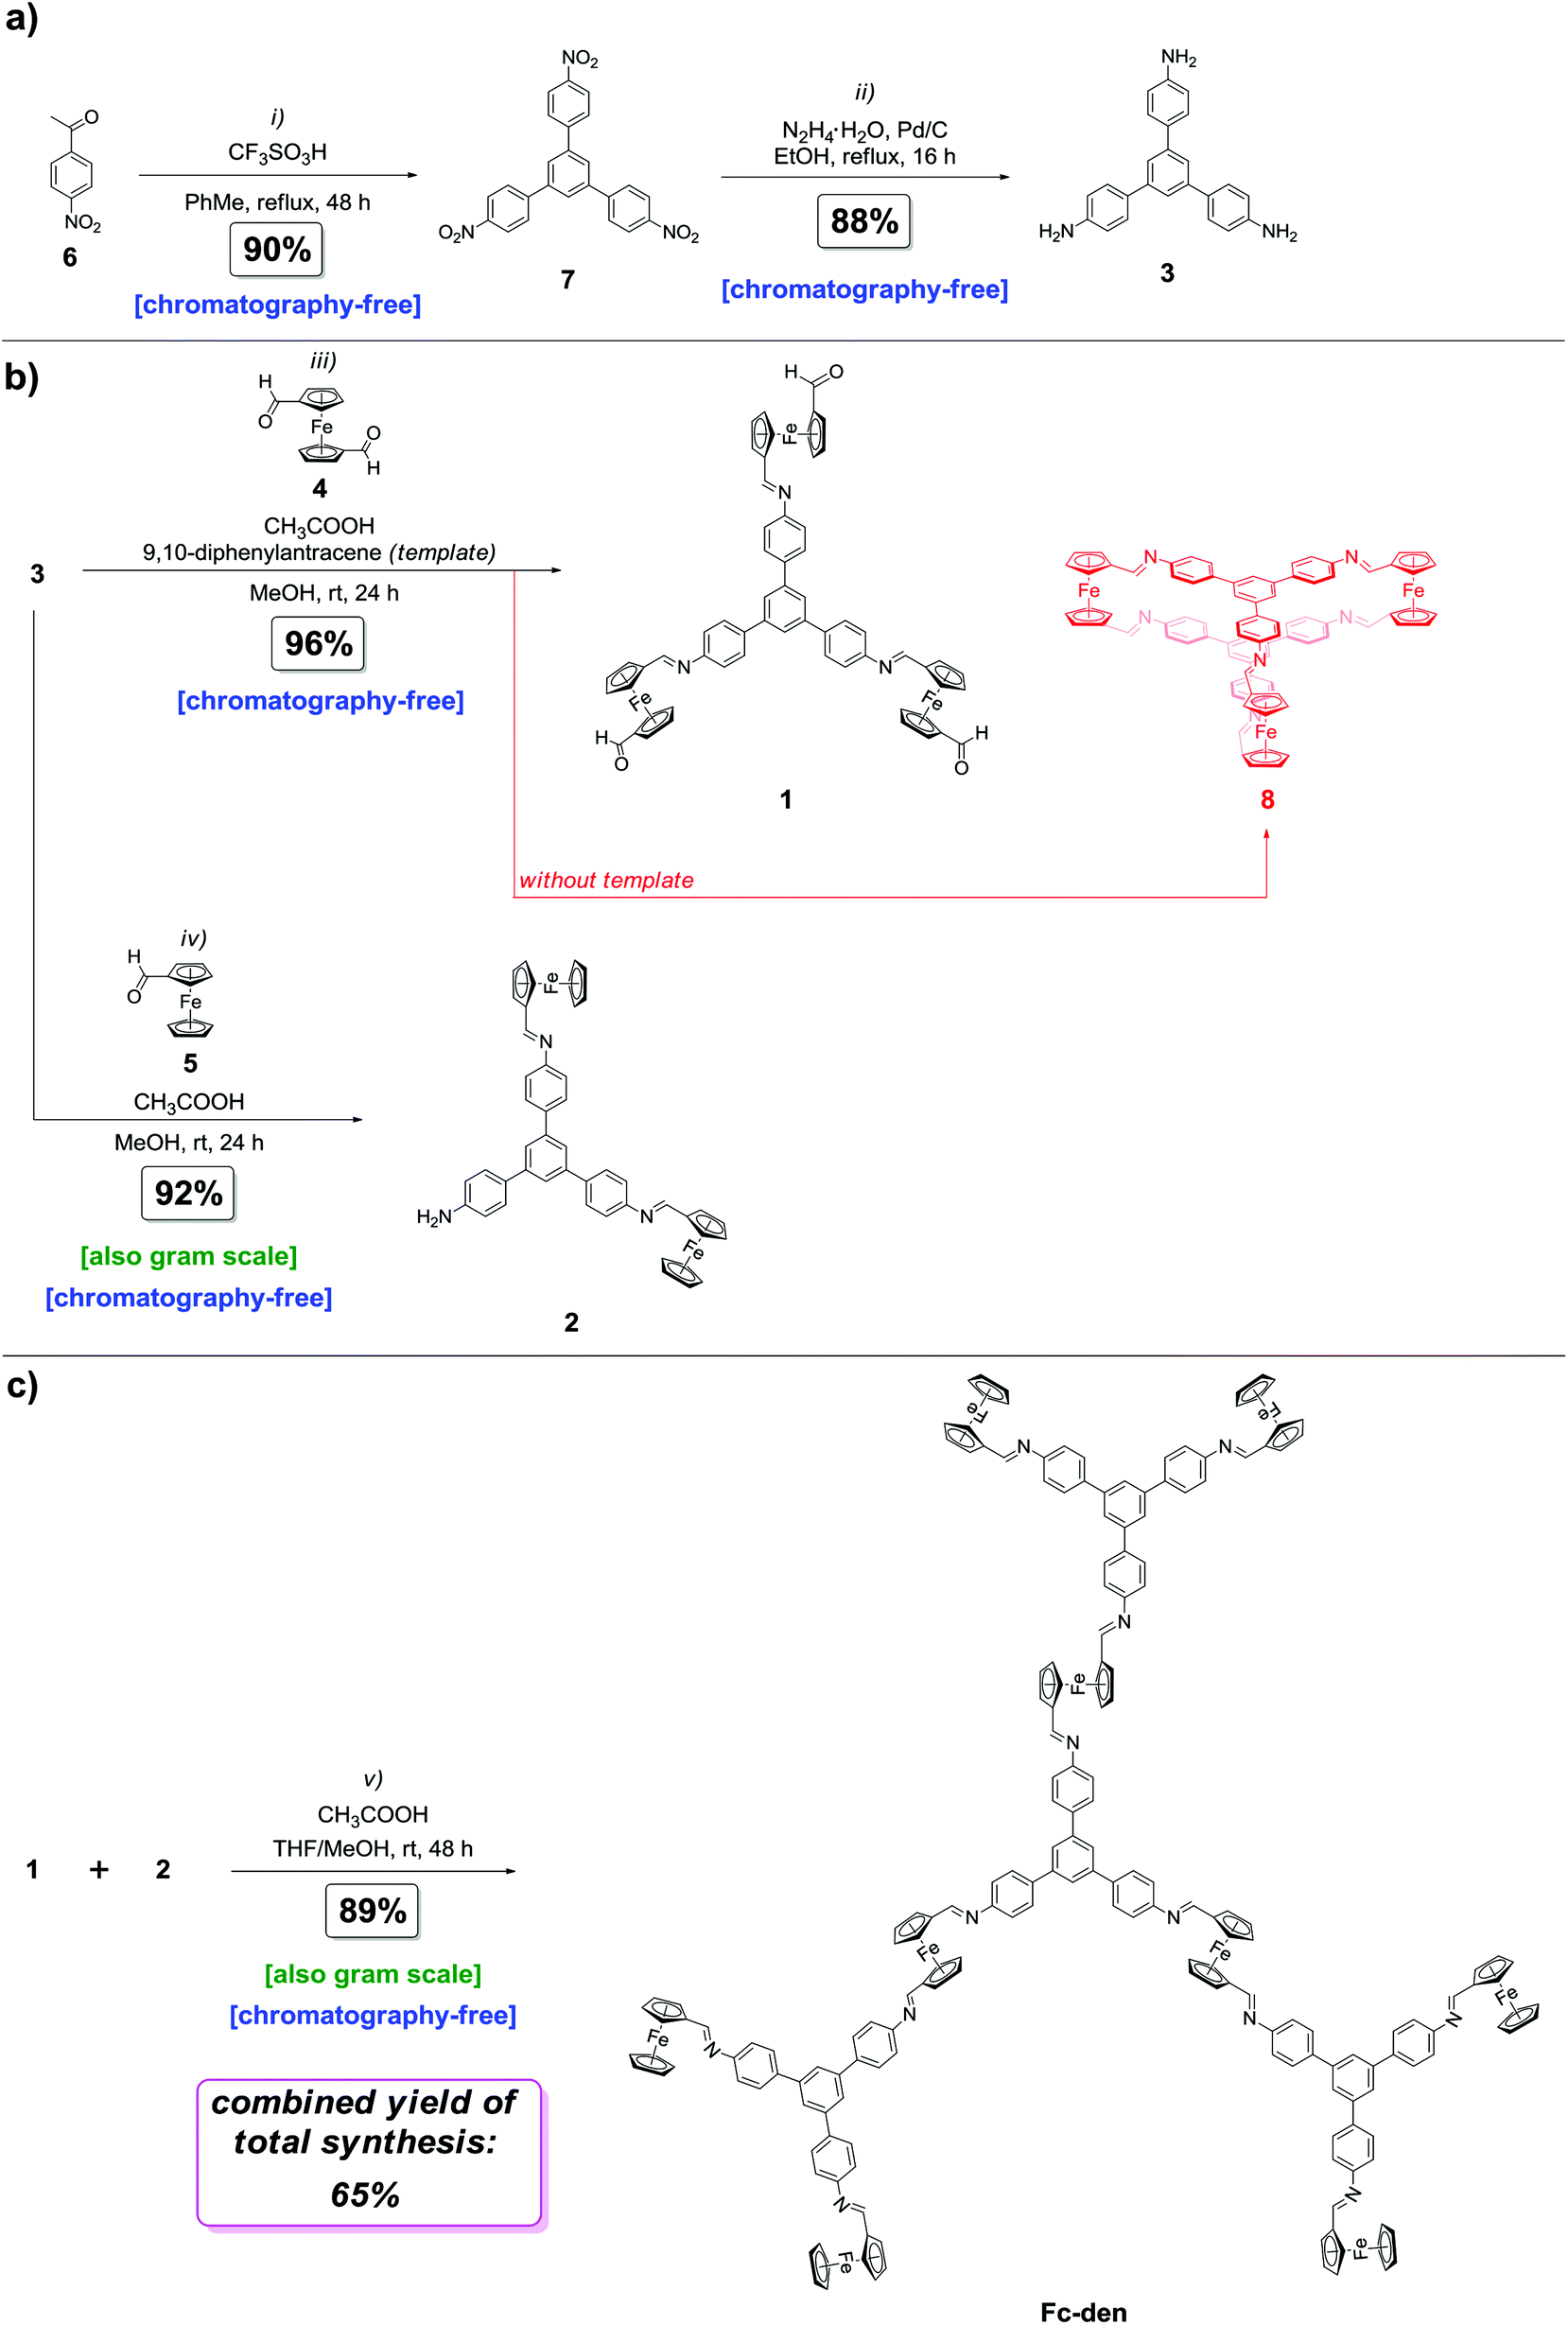 A Chromatography Free Total Synthesis Of A Ferrocene Containing Dendrimer Exhibiting The Property Of Recognizing 9 10 Diphenylanthracene Dalton Transactions Rsc Publishing Doi 10 1039 D0dtg